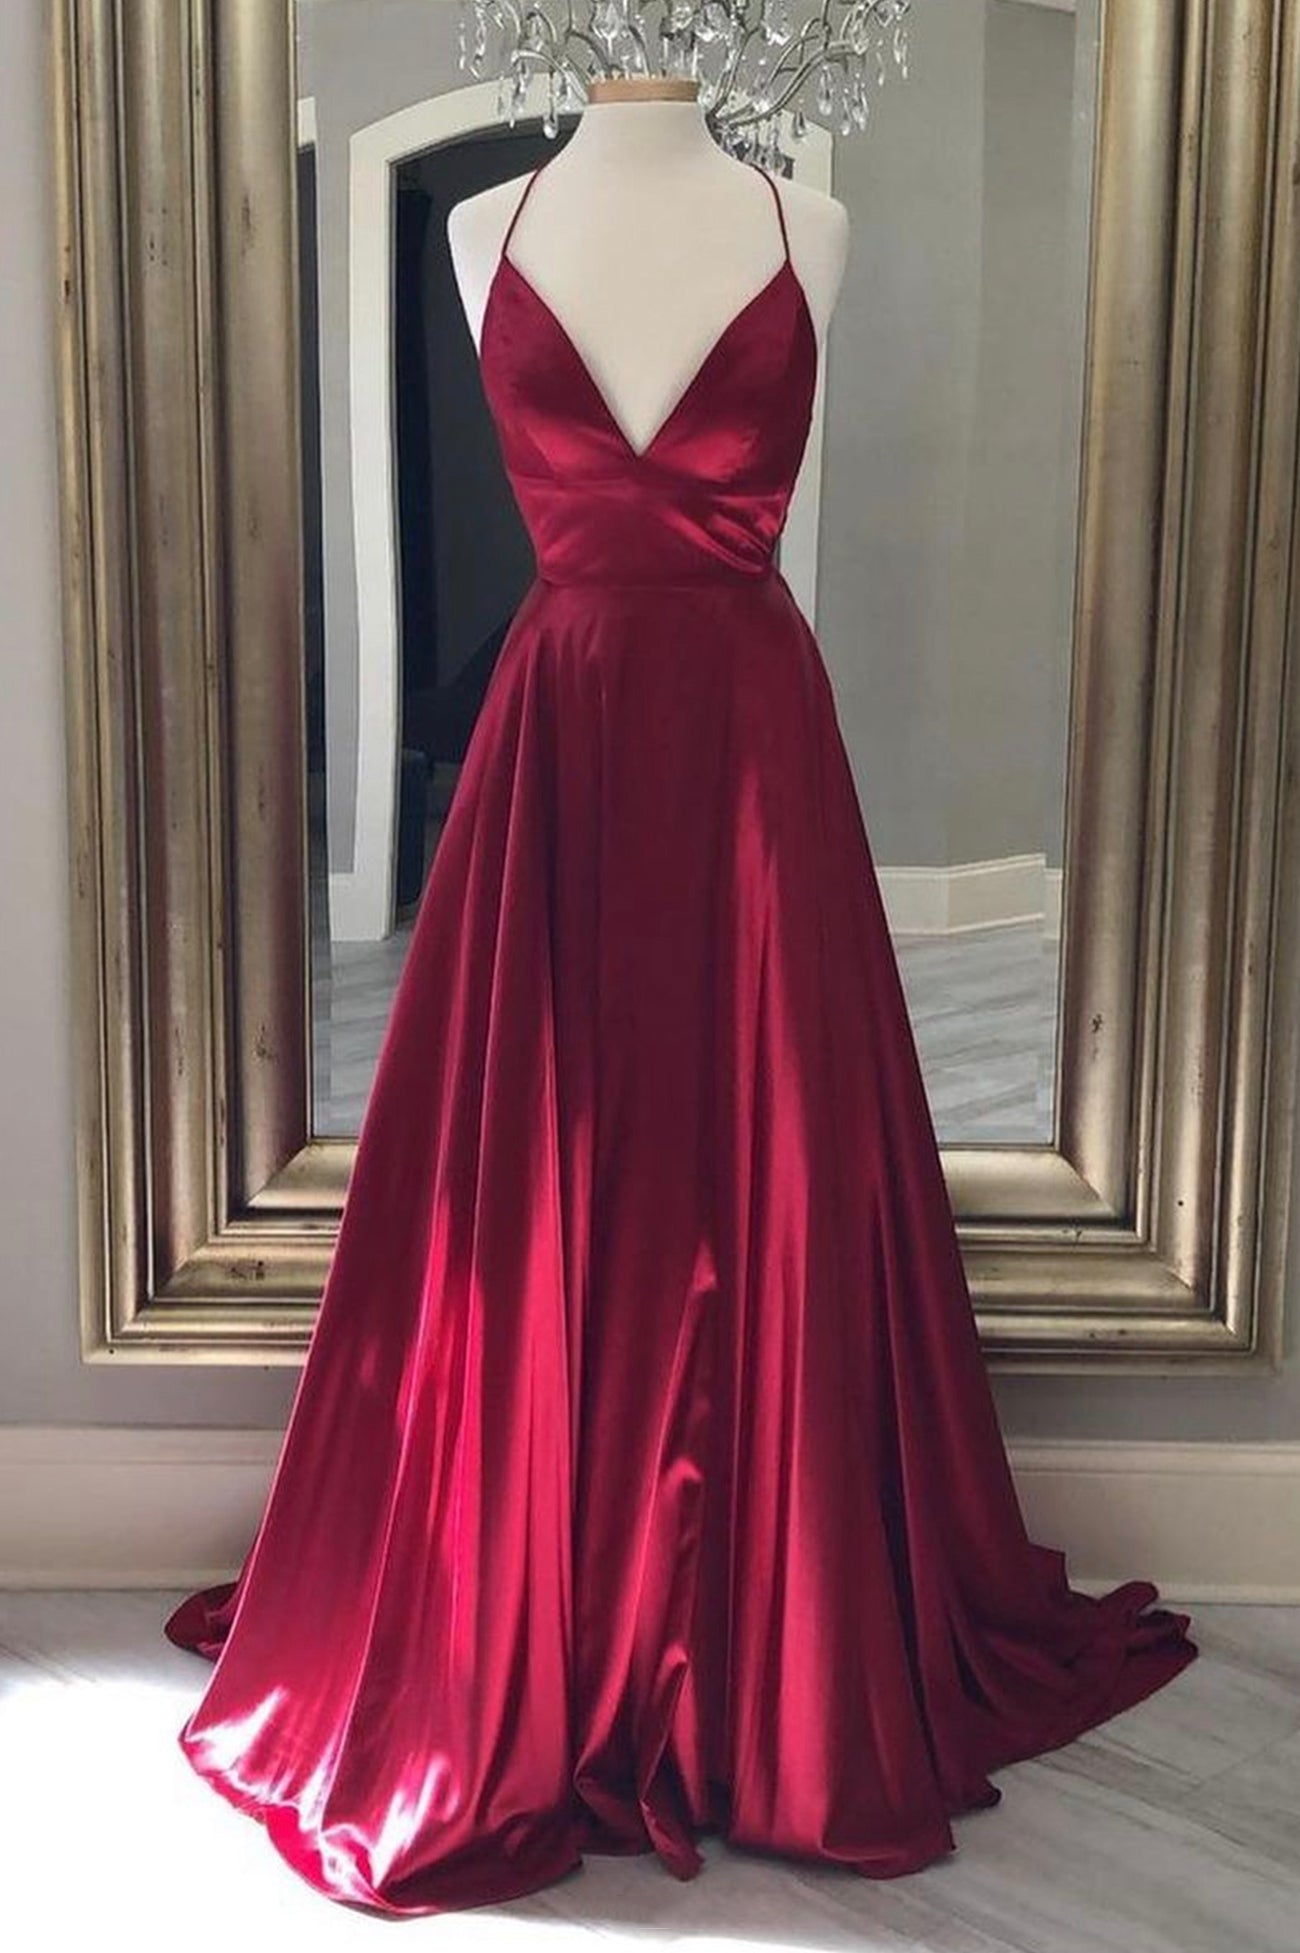 Party Dresses And Jumpsuits, Burgundy Satin Long Prom Dresses, Simple A-Line Backless Evening Dresses